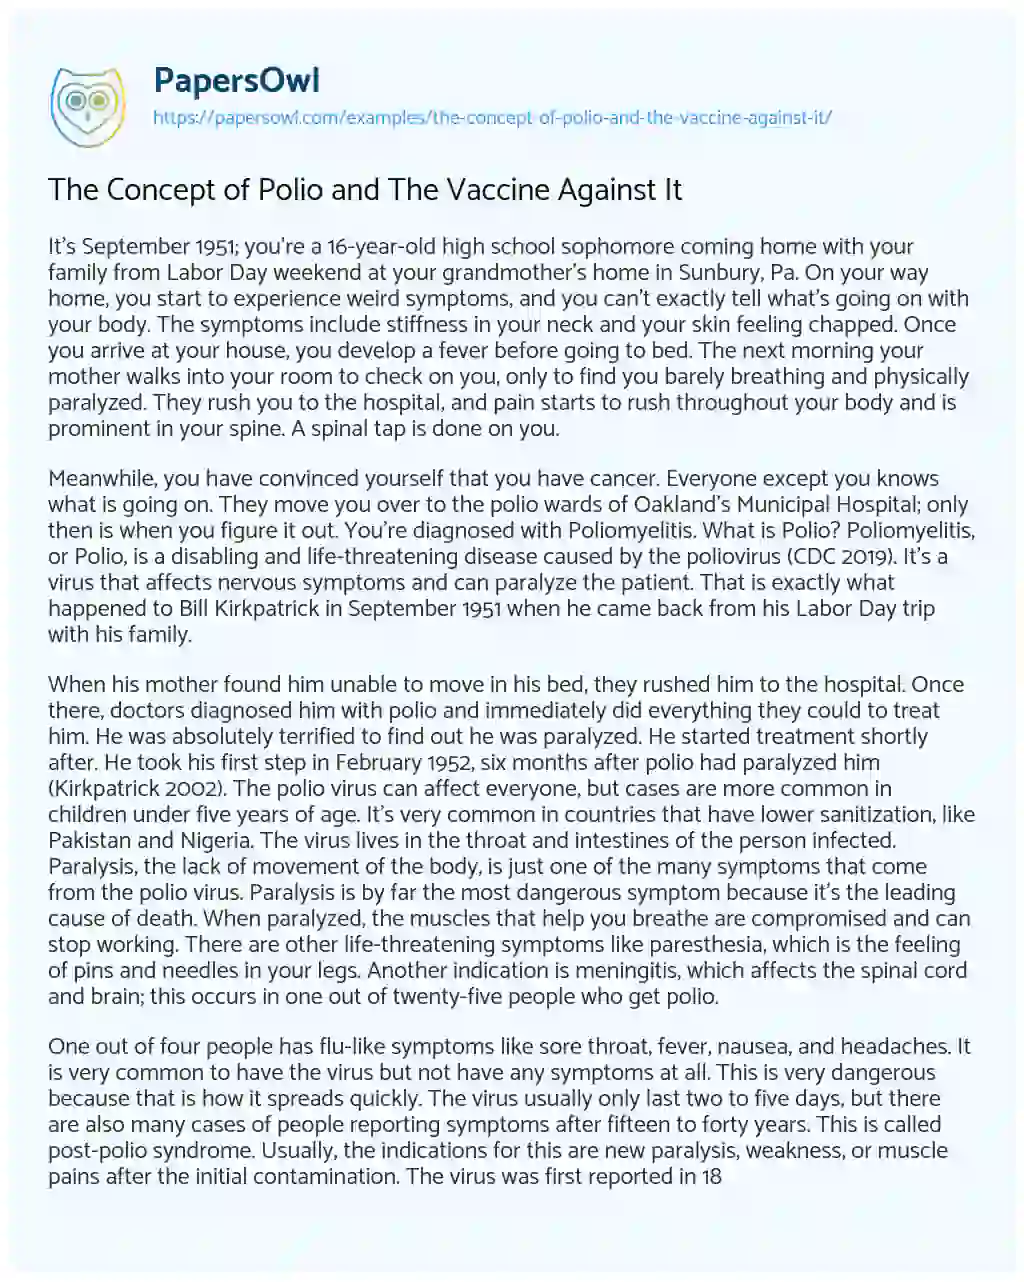 Essay on The Concept of Polio and the Vaccine against it